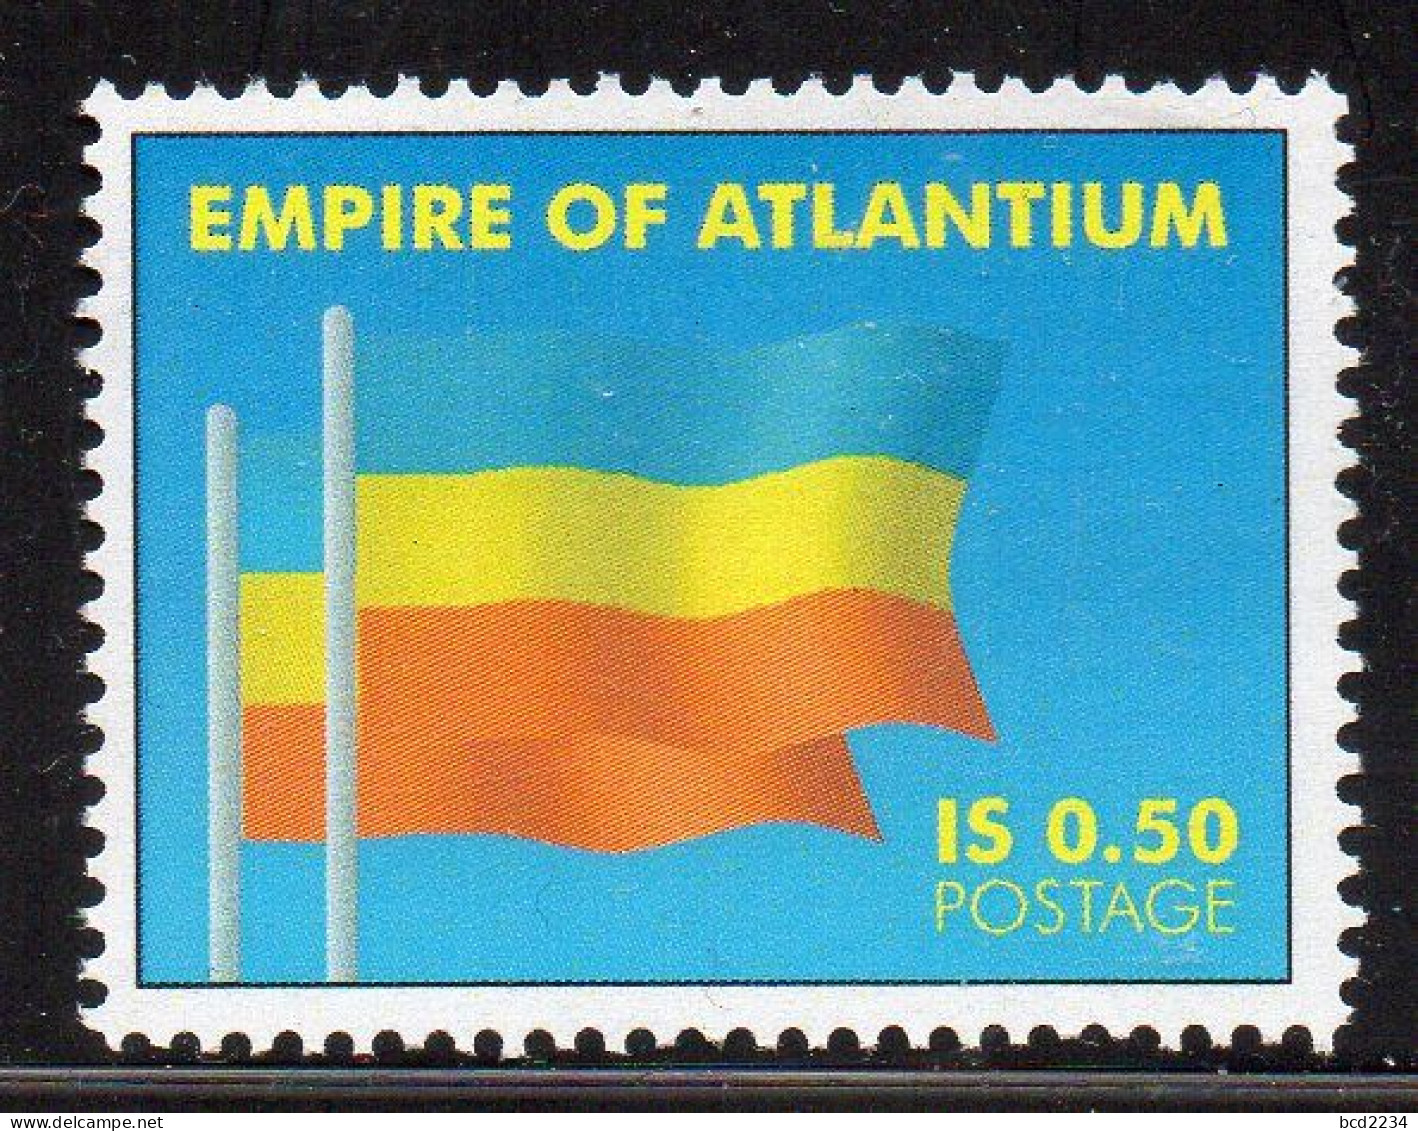 EMPIRE OF ATLANTIUM 2006 RARE NHM ONLY 3000 STAMPS ISSUED MICRONATION NEW SOUTH WALES AUSTRALIA INDEPENDENT NATION FLAG - Fantasie Vignetten